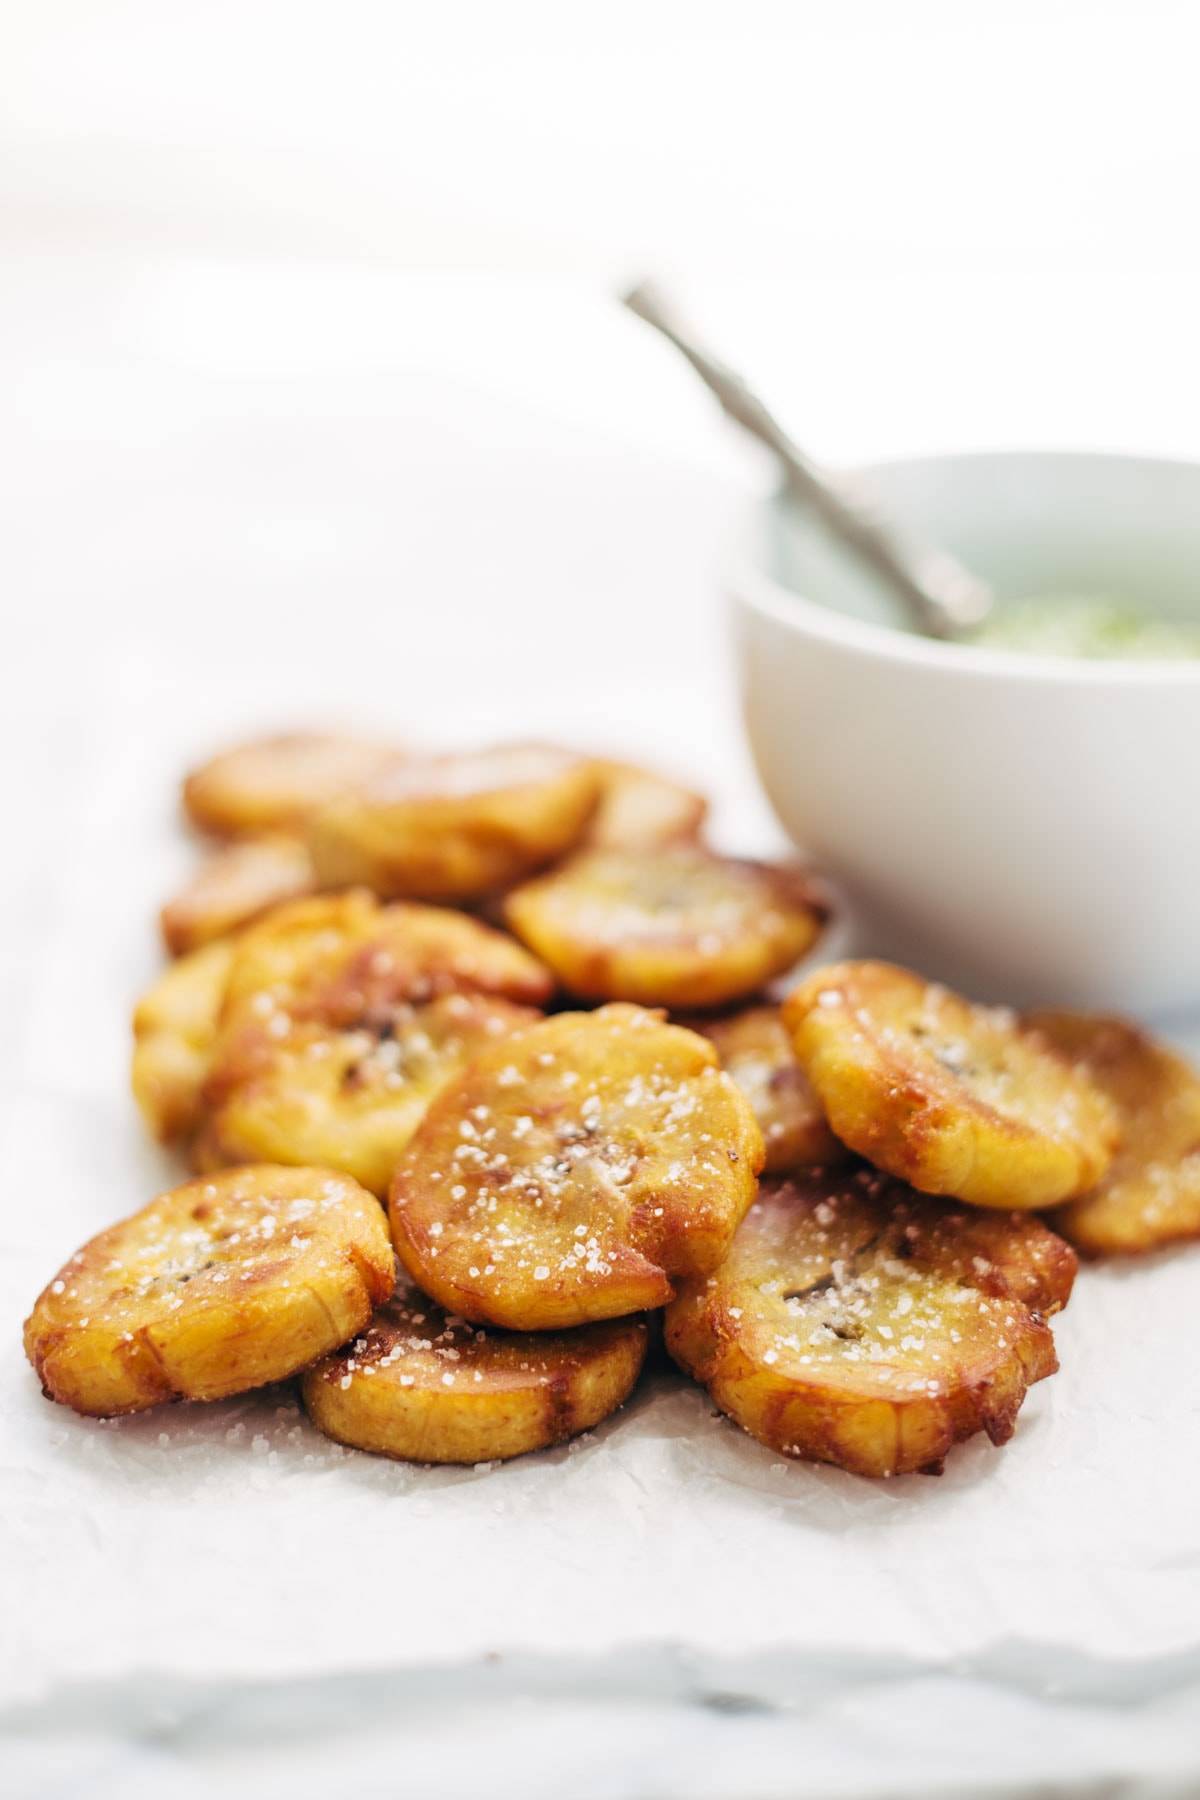 Crispy Salted Tostones - super easy recipe for golden brown bites of perfection with just one ingredient: PLANTAINS! video demo in the post. | pinchofyum.com